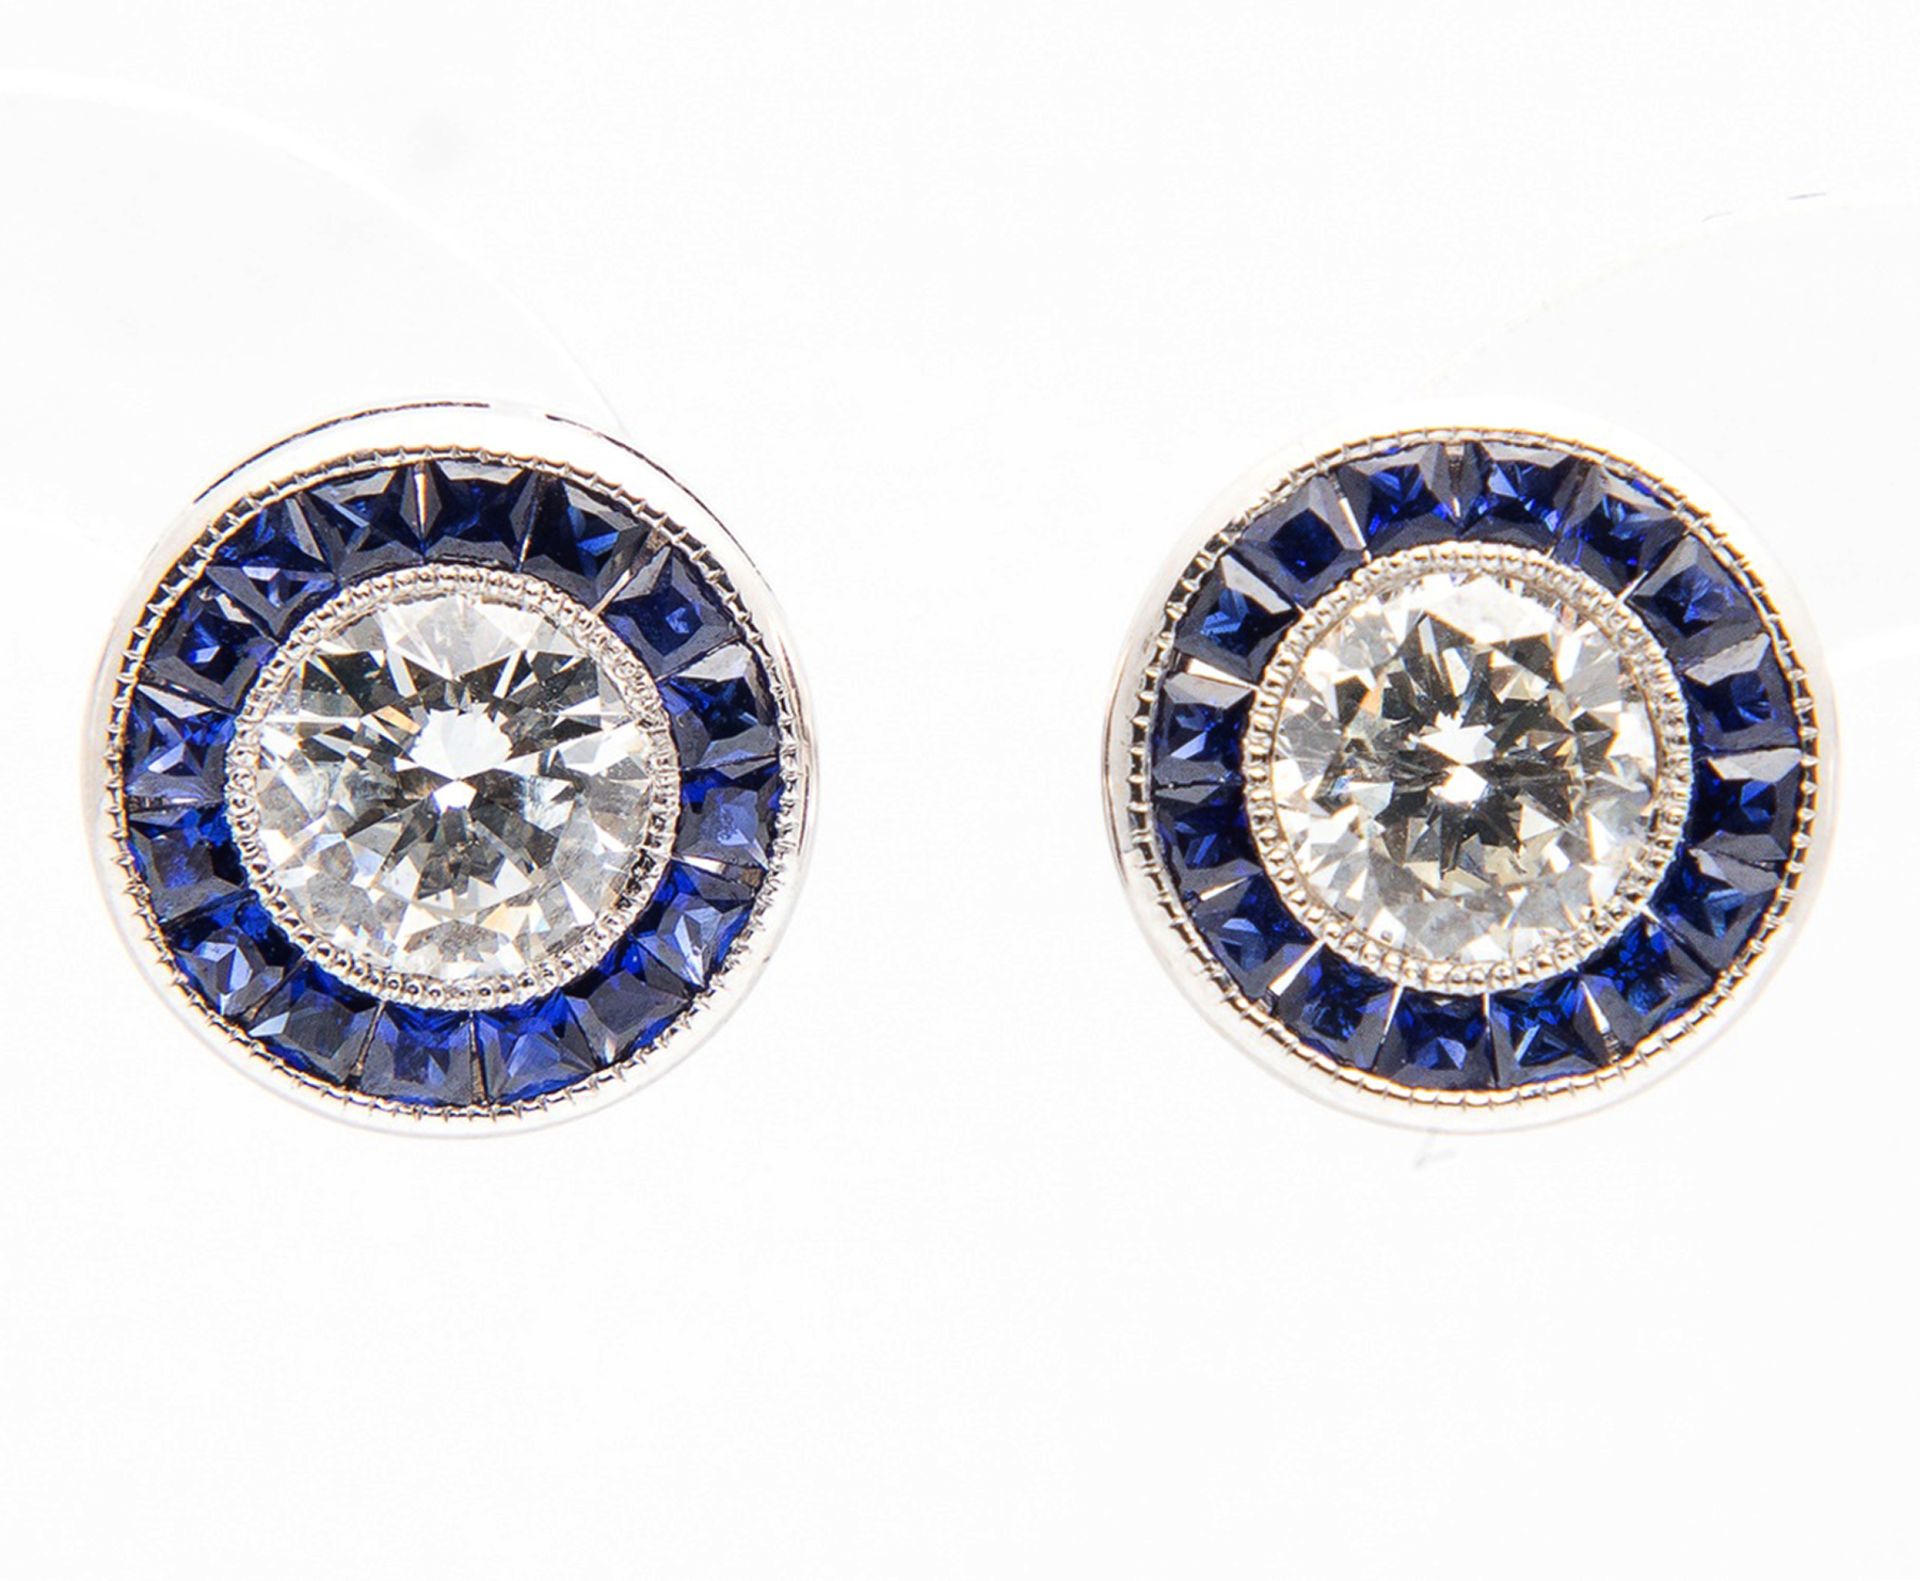 Elegant 1920s earrings with two 0.50 ct Diamonds each edged with sapphires, very good purity and col